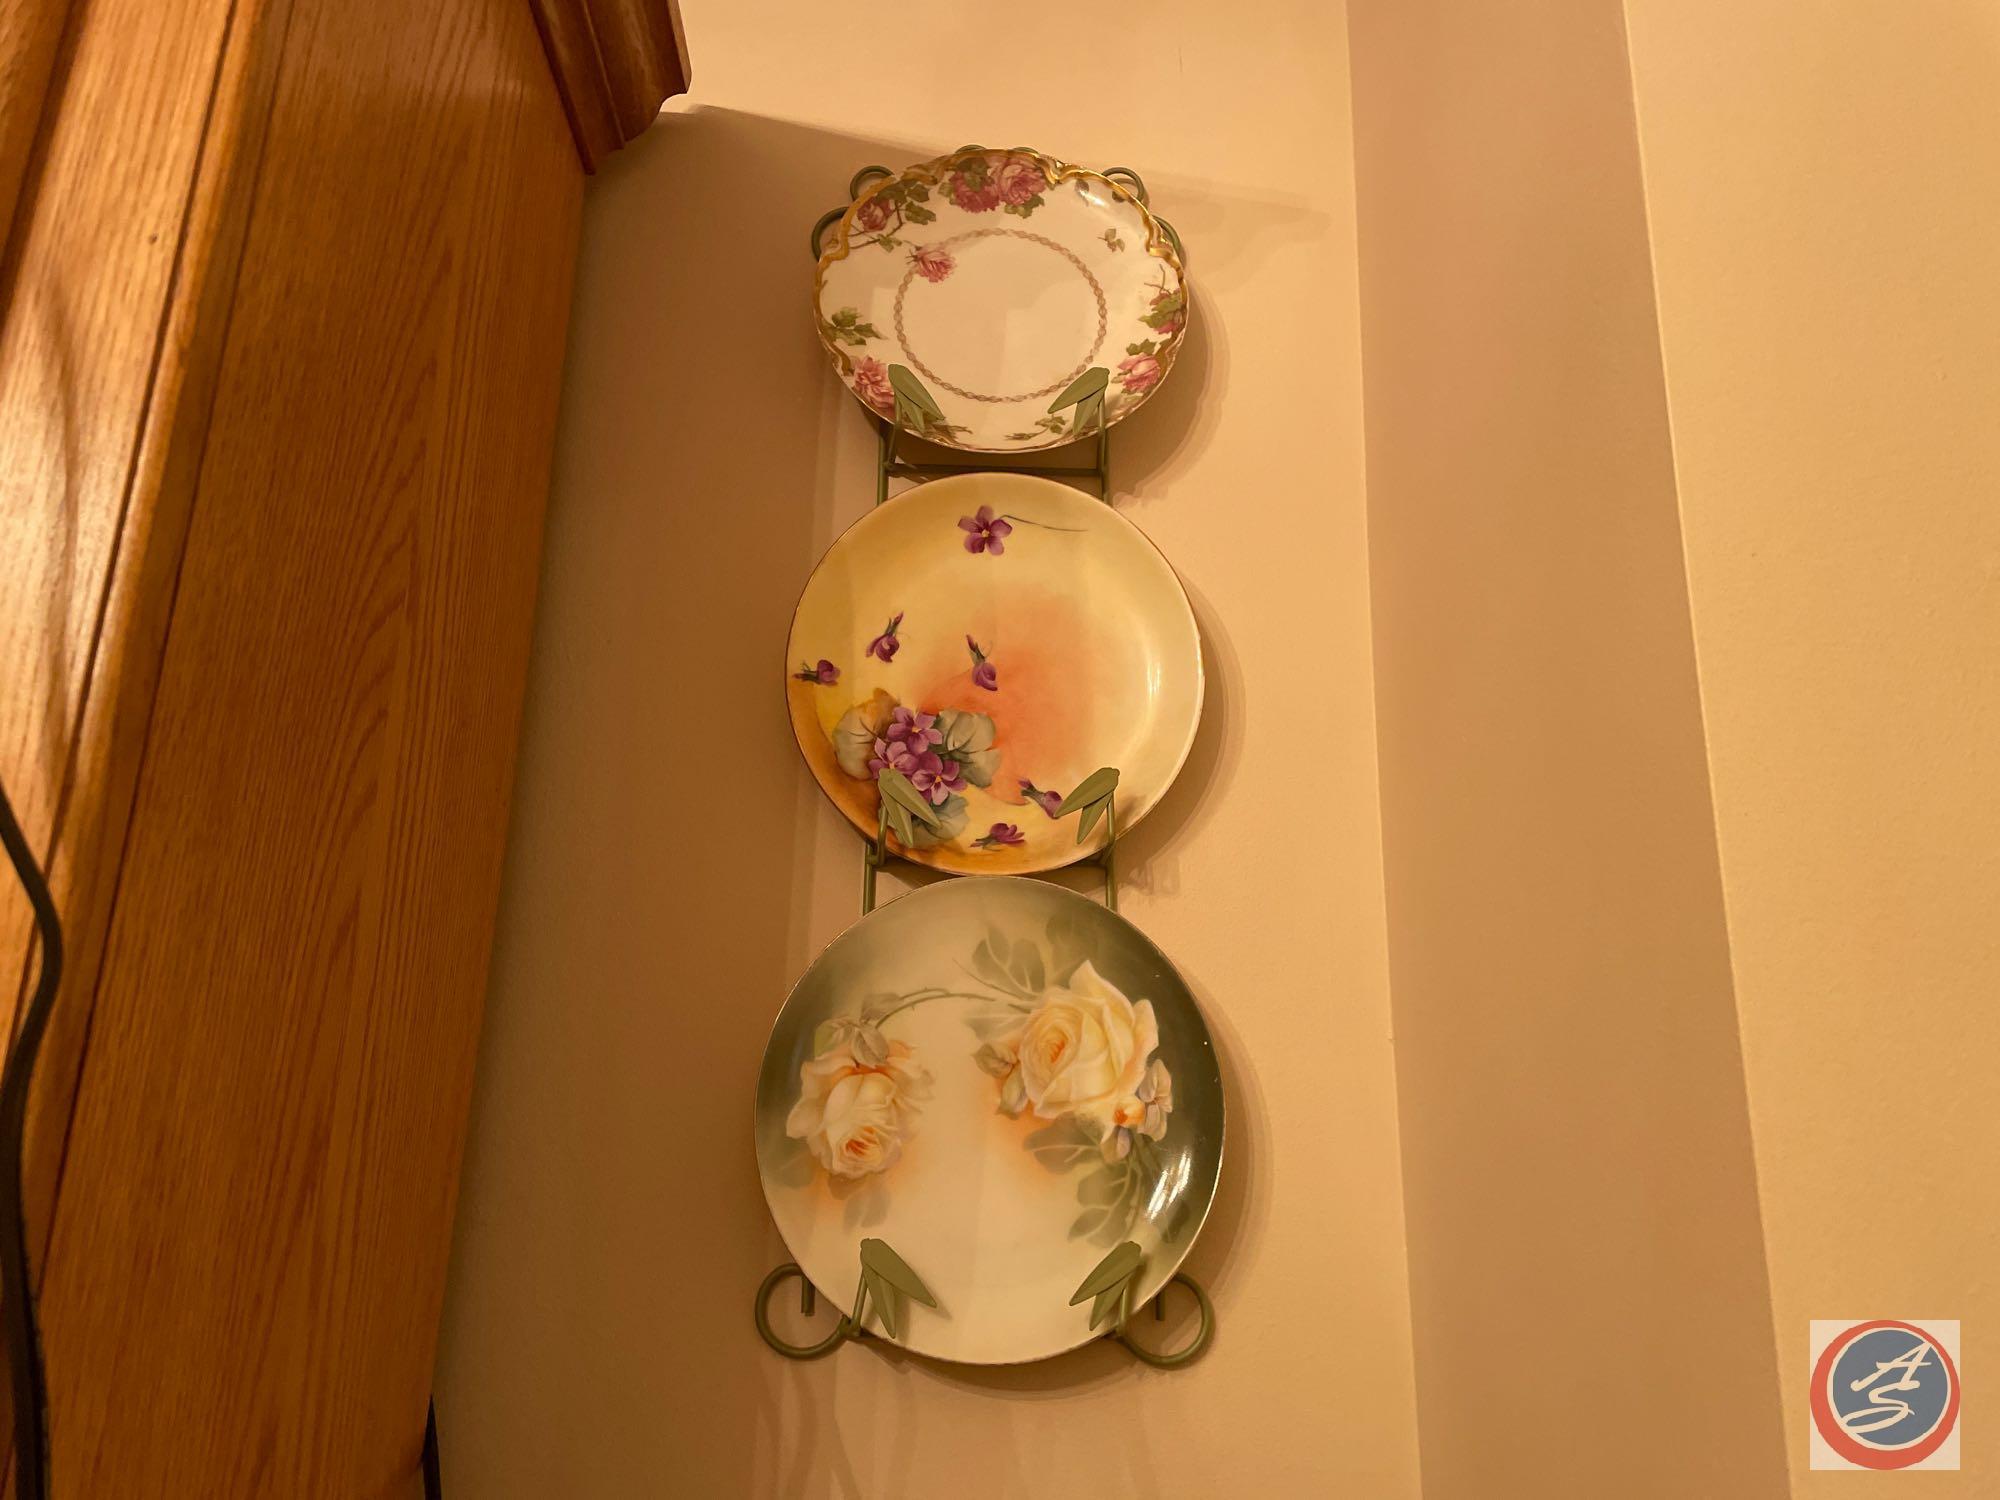 (2) Three Plate Wall Displays, (2) Four Plate Wall Displays, Wall Hanging Two Compartment Mail